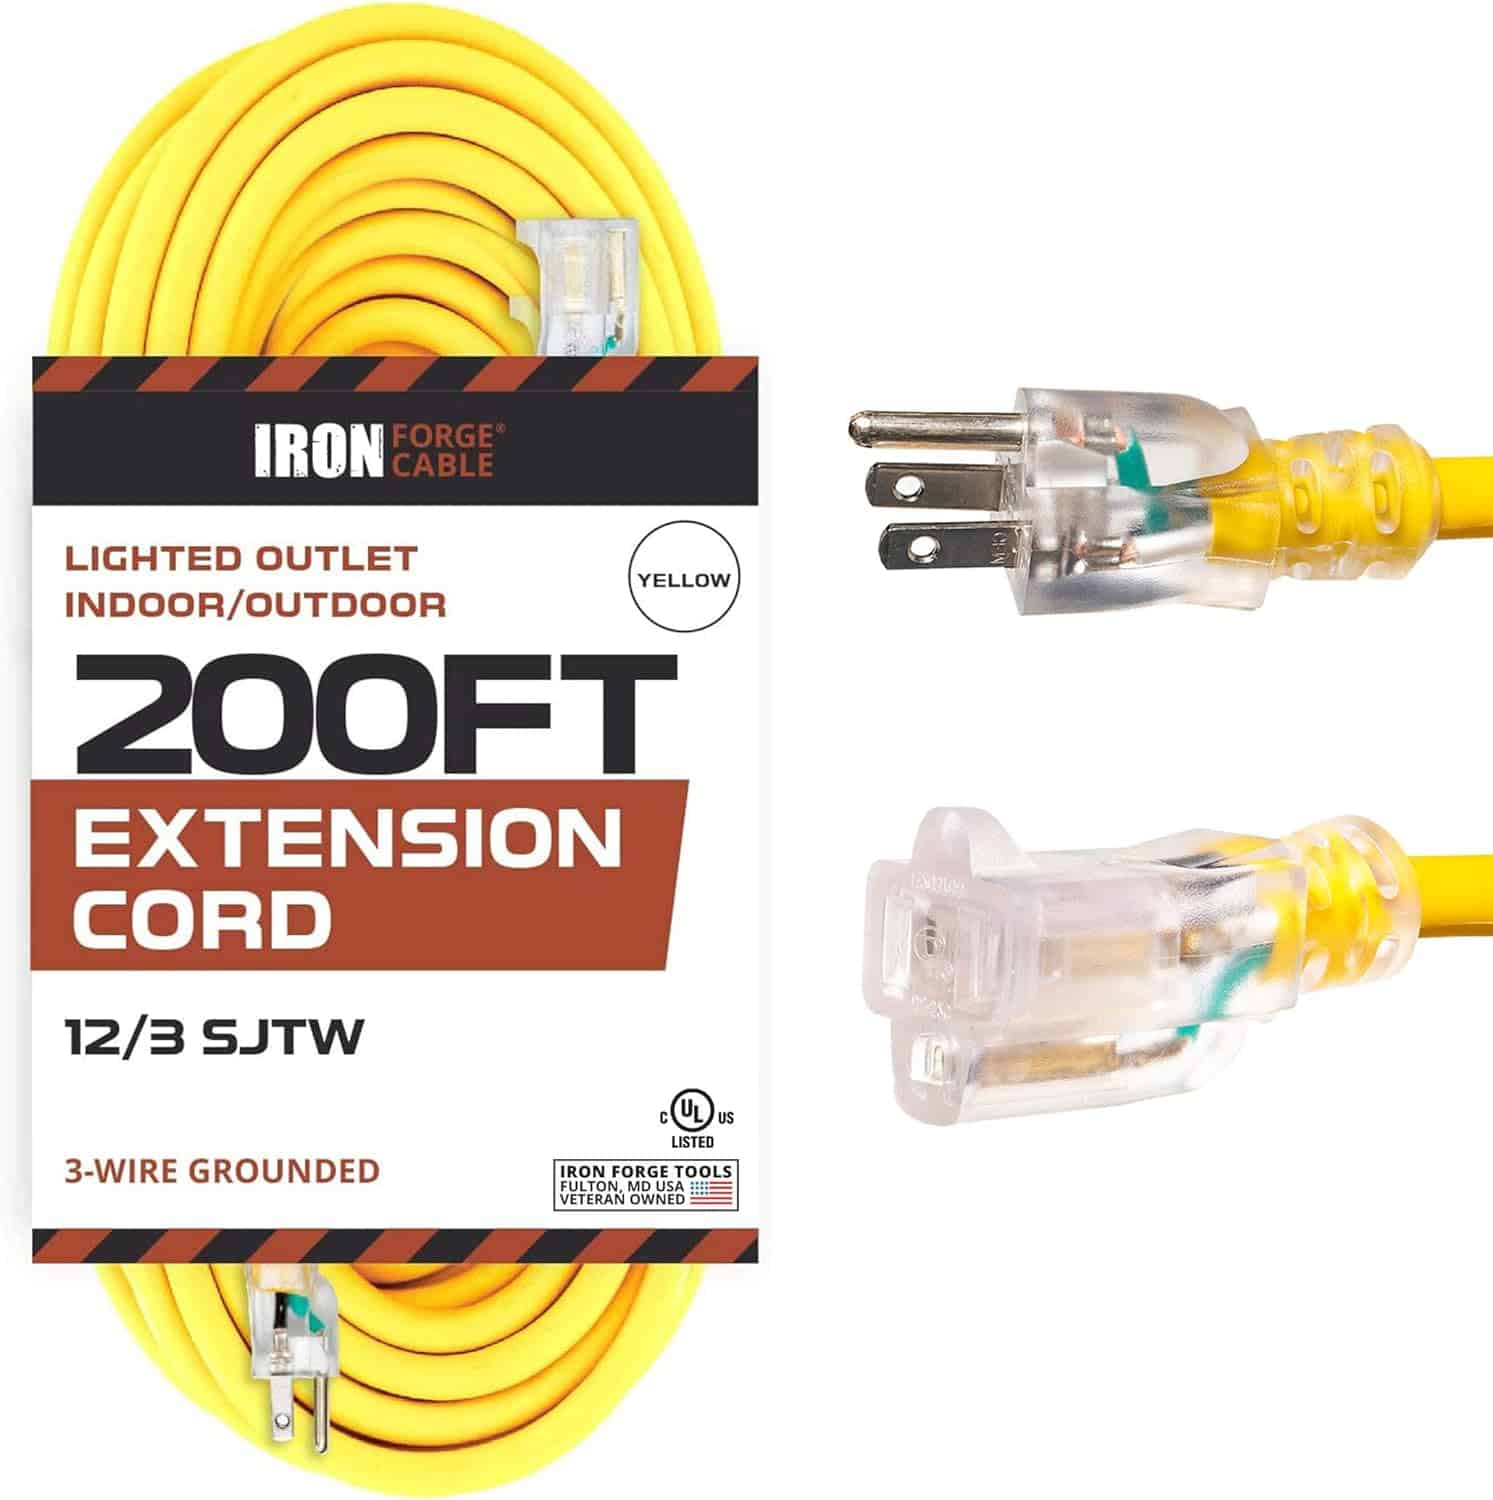 Iron Forge Heavy Duty Extension Cord, 200 ft Extension Cord Outdoor with 3 Prong Lighted End, 12 Gauge Extension Cord 200′ Construction Grade Great for Major Appliances & Generator – US Veteran Owned 1